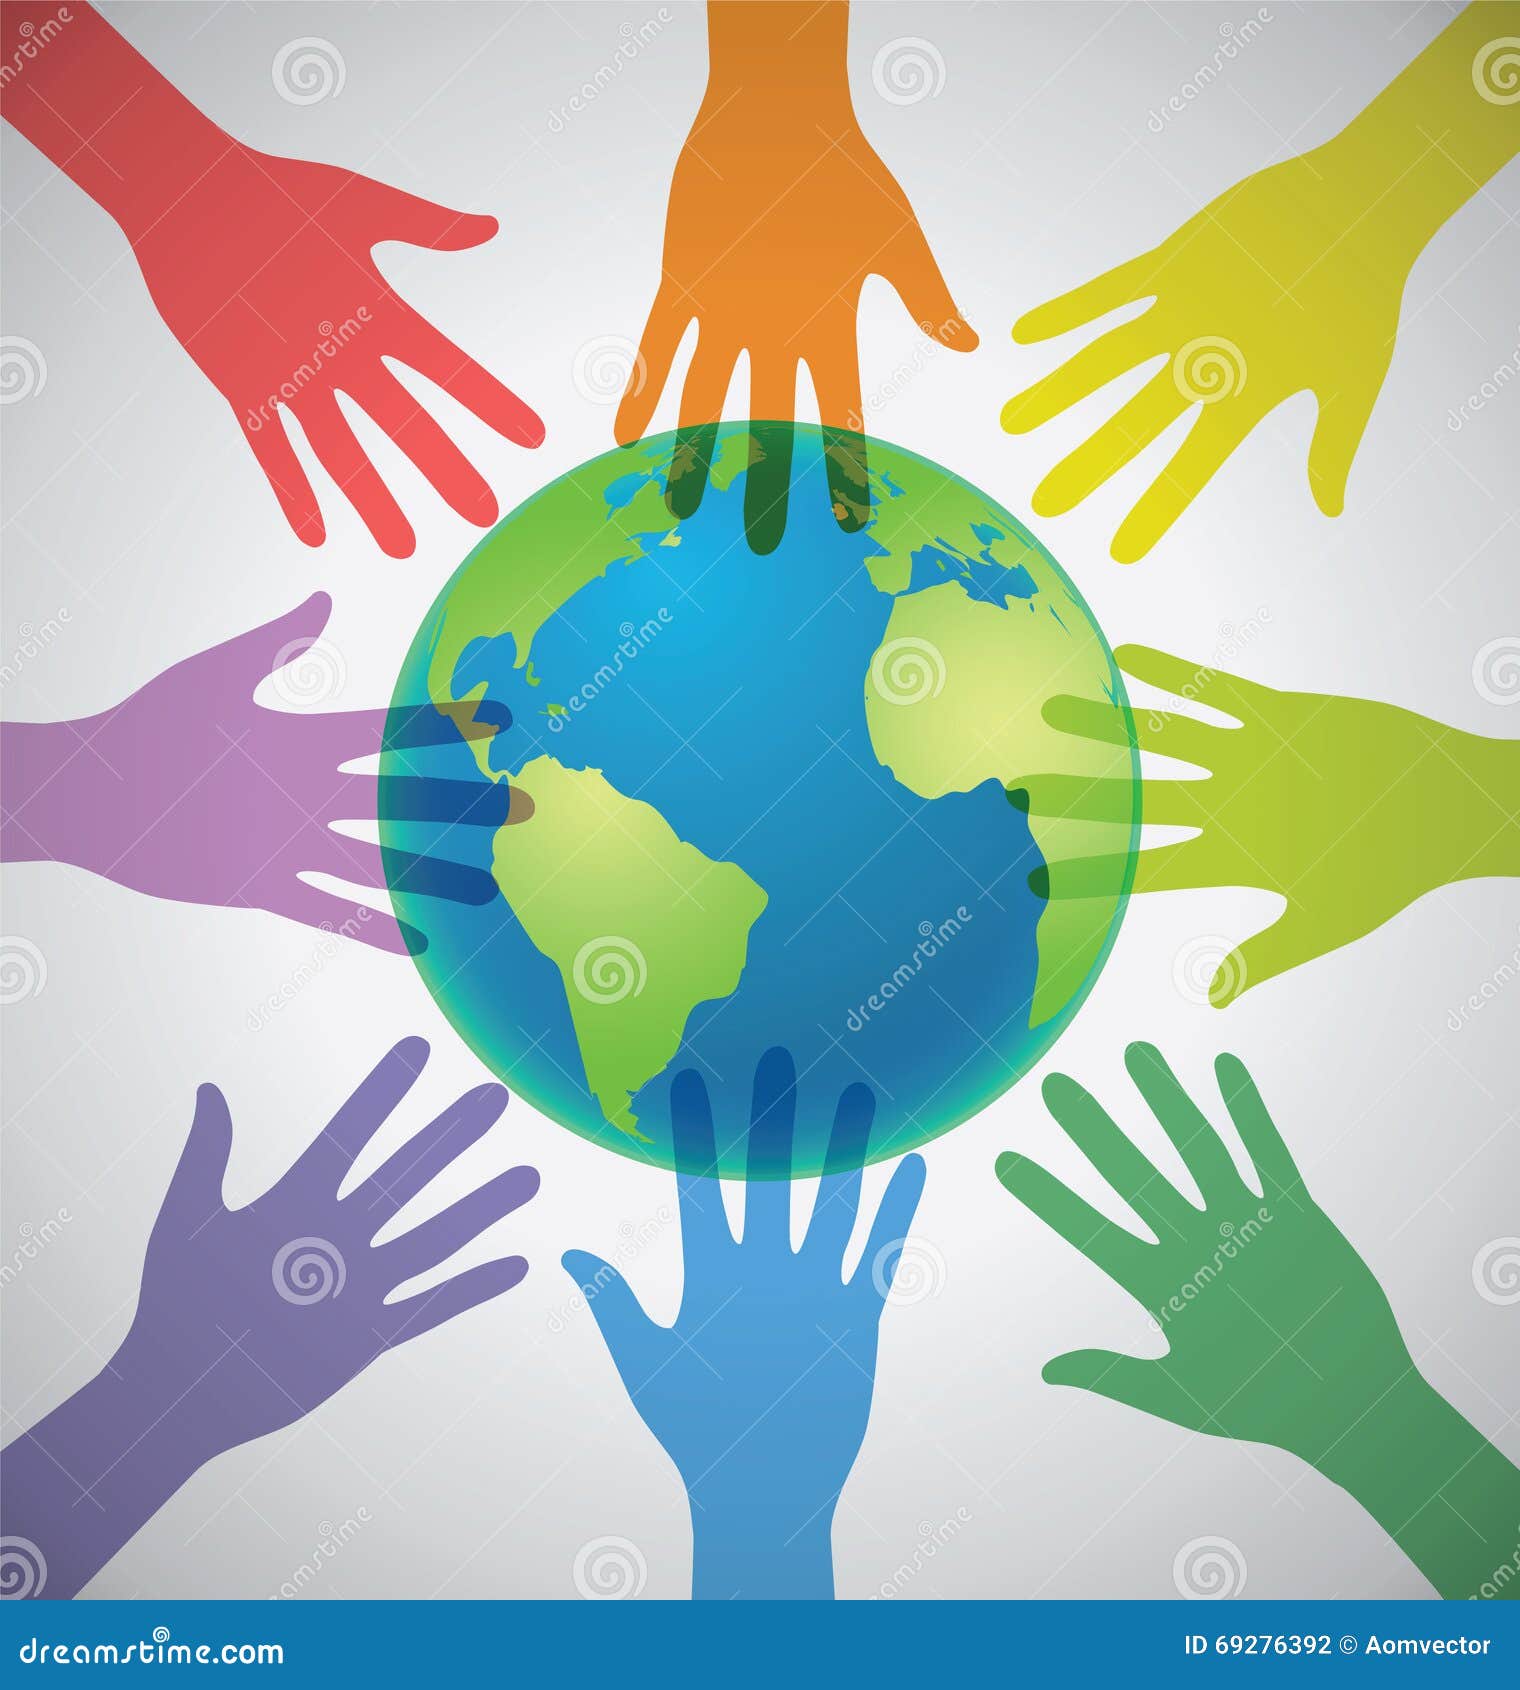 many colorful hands surrounding the earth, globe, unity, world